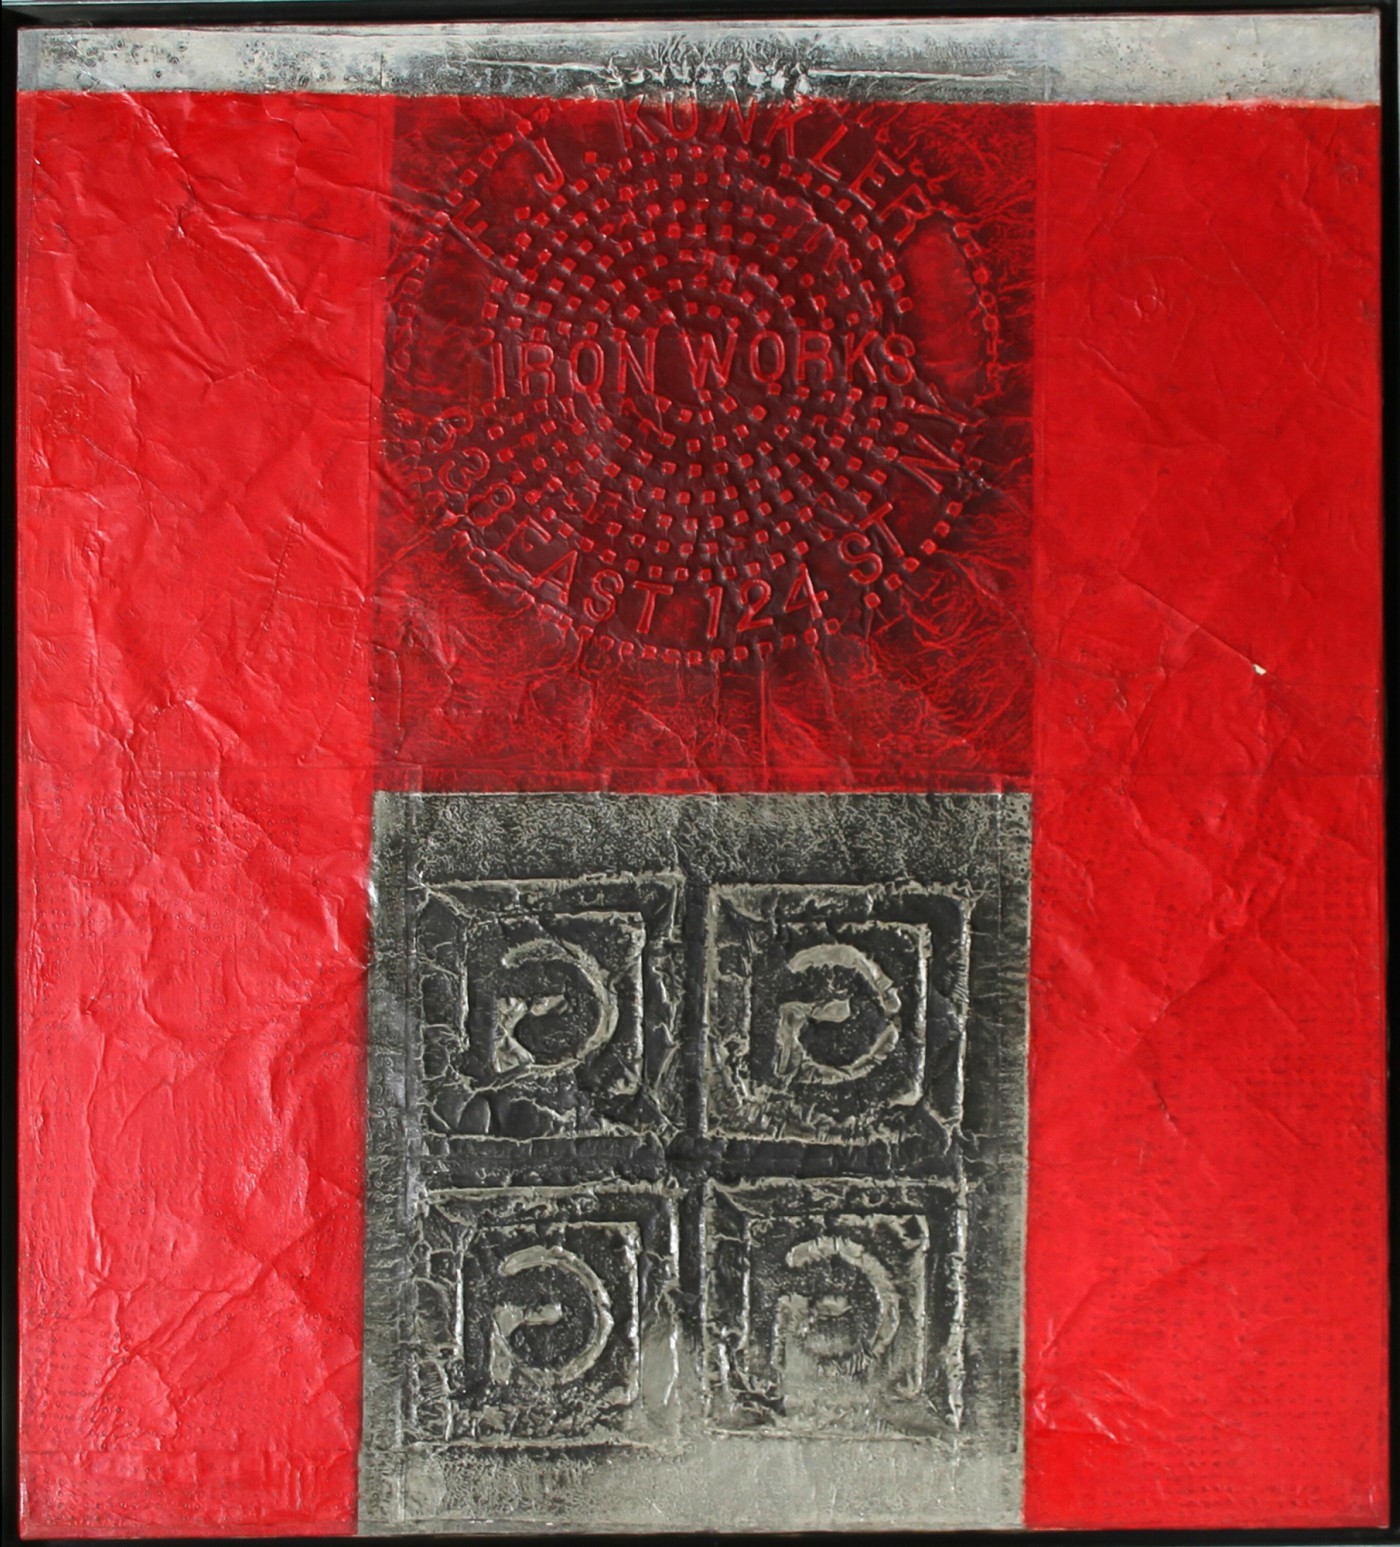 Aluminum foil painting by José Antonio Fernández-Muro that uses red pigment with the impressions of a manhole cover and gate.